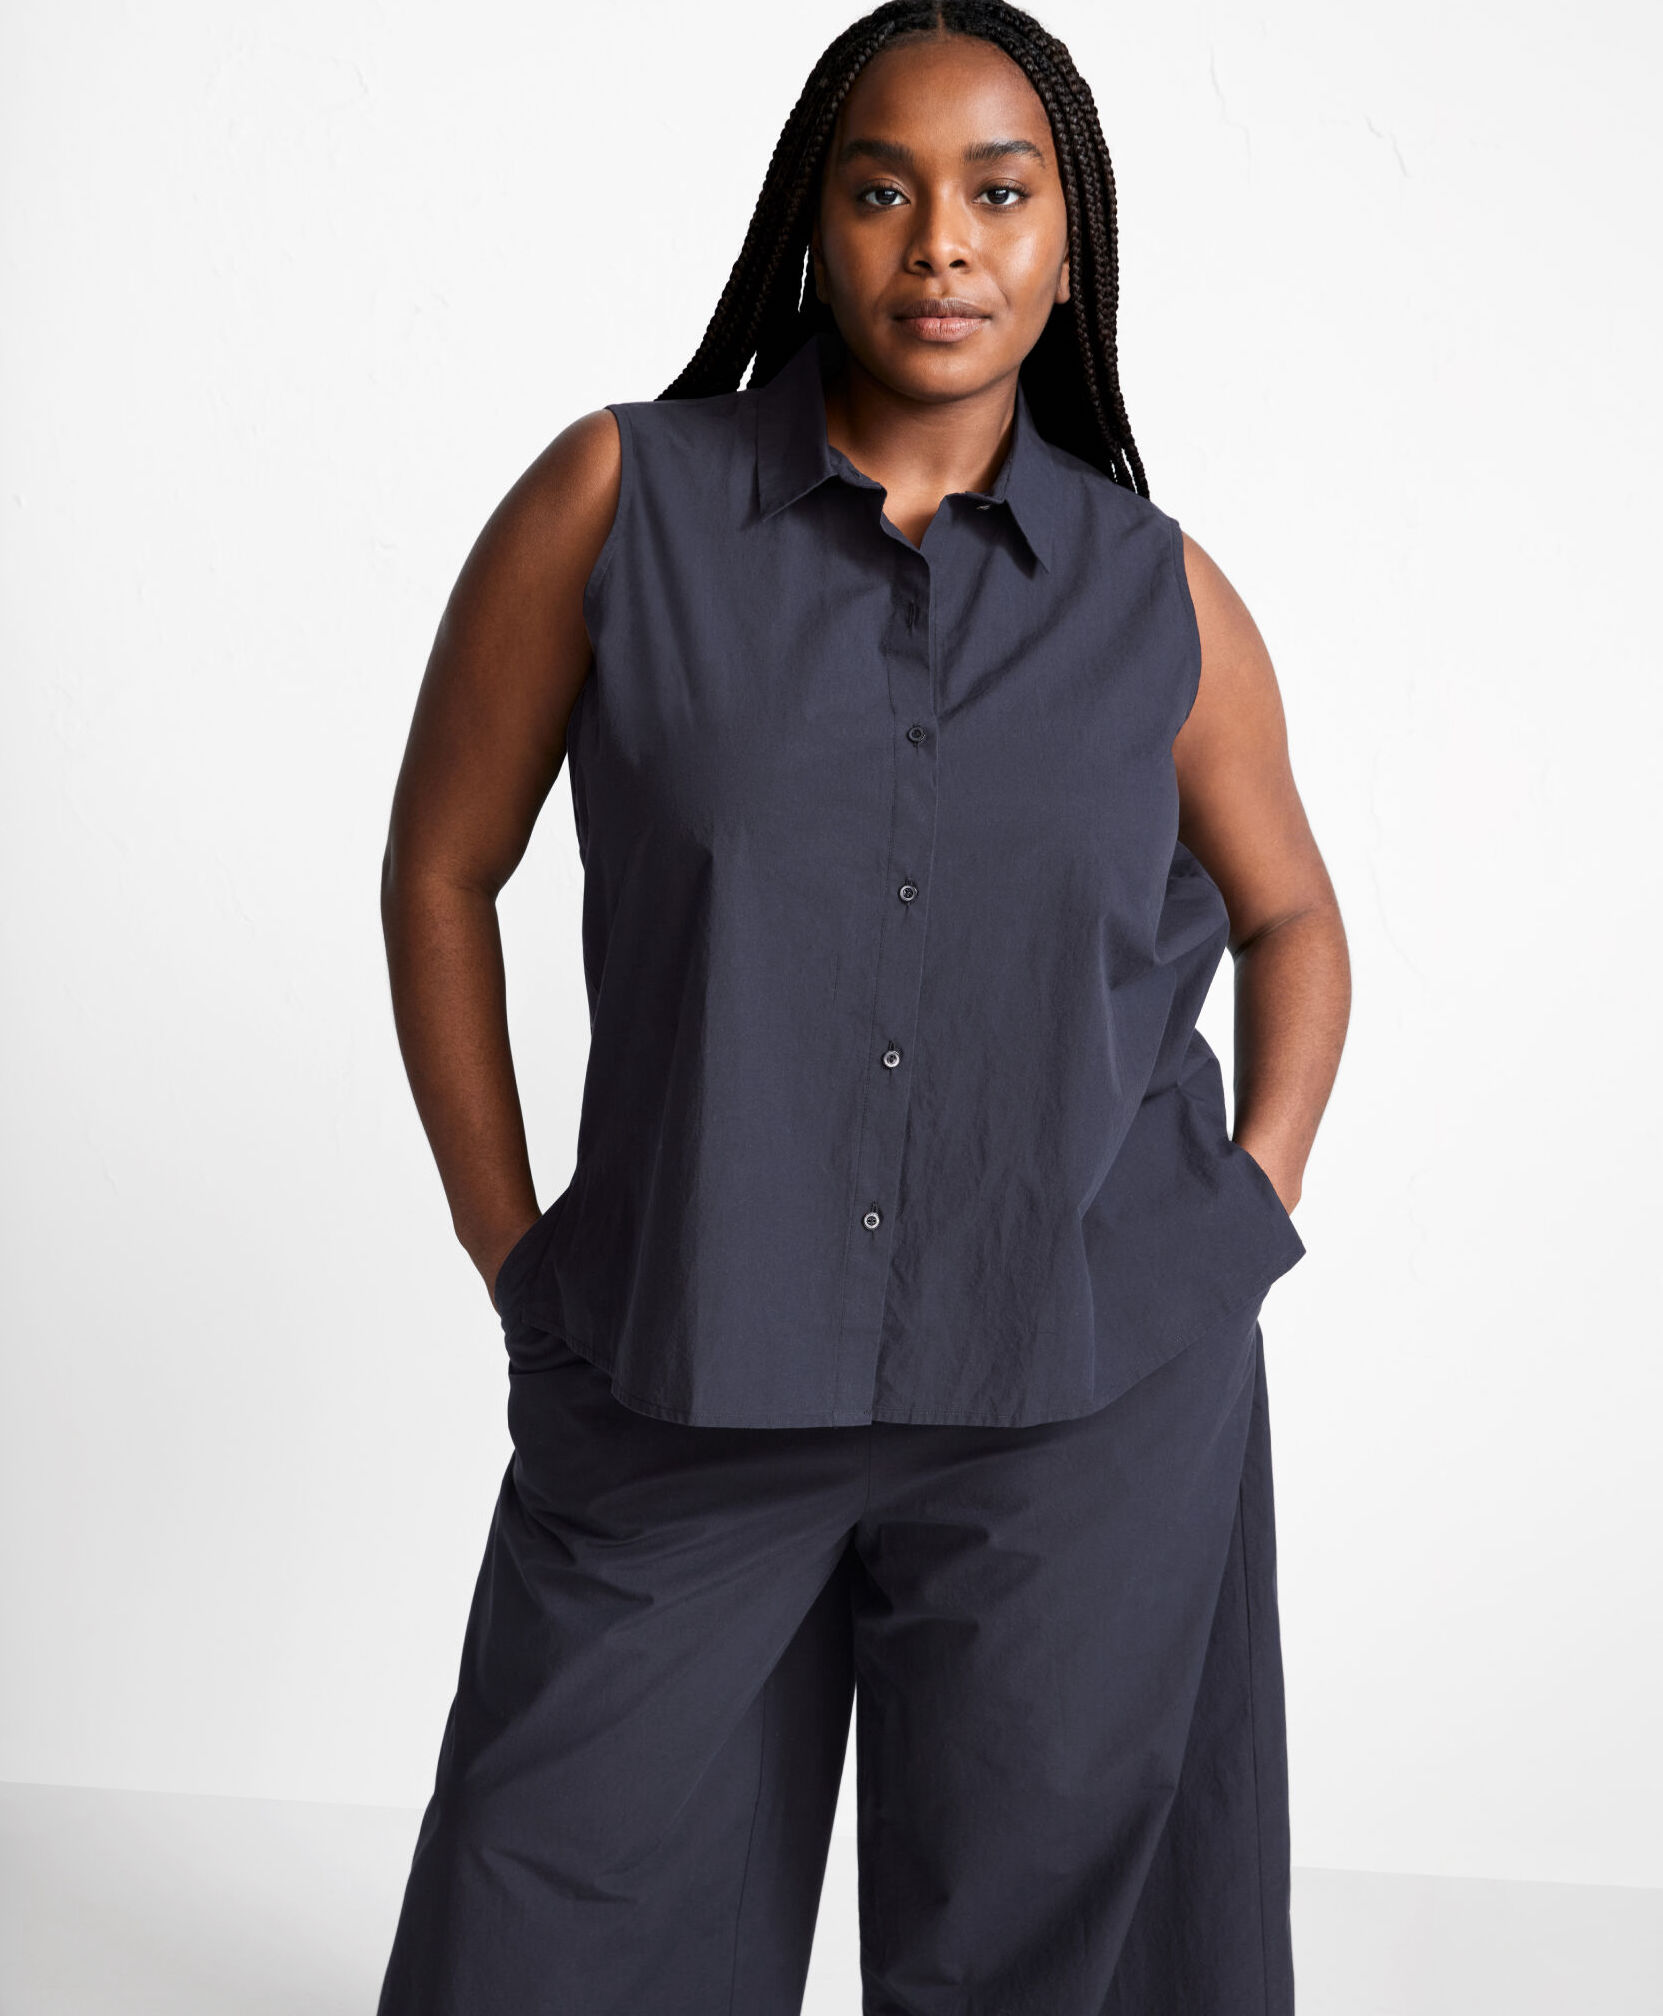 A plus size model in a sleeveless collared button down and pant set.